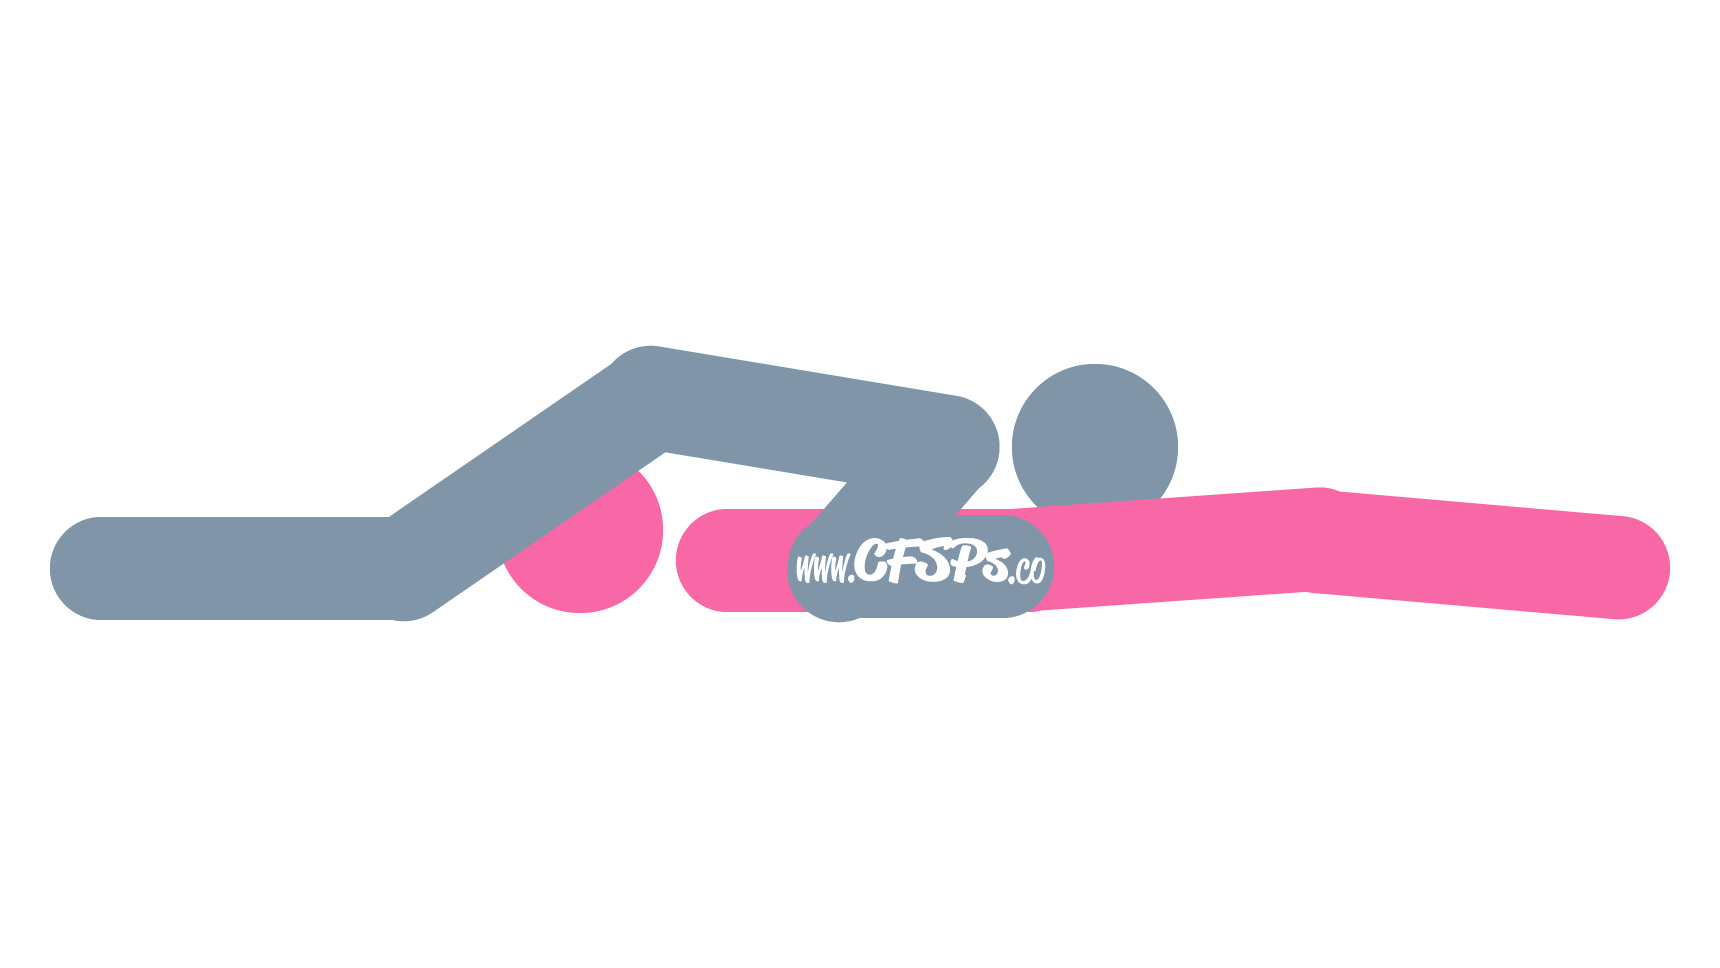 This stick figure image depicts a man and woman engaging in oral sex in the 69 Inverted oral sex position. The woman is lying on her back in bed. The man is lying on top of her while straddling her face with his pelvis and positioning his face near her pelvis.